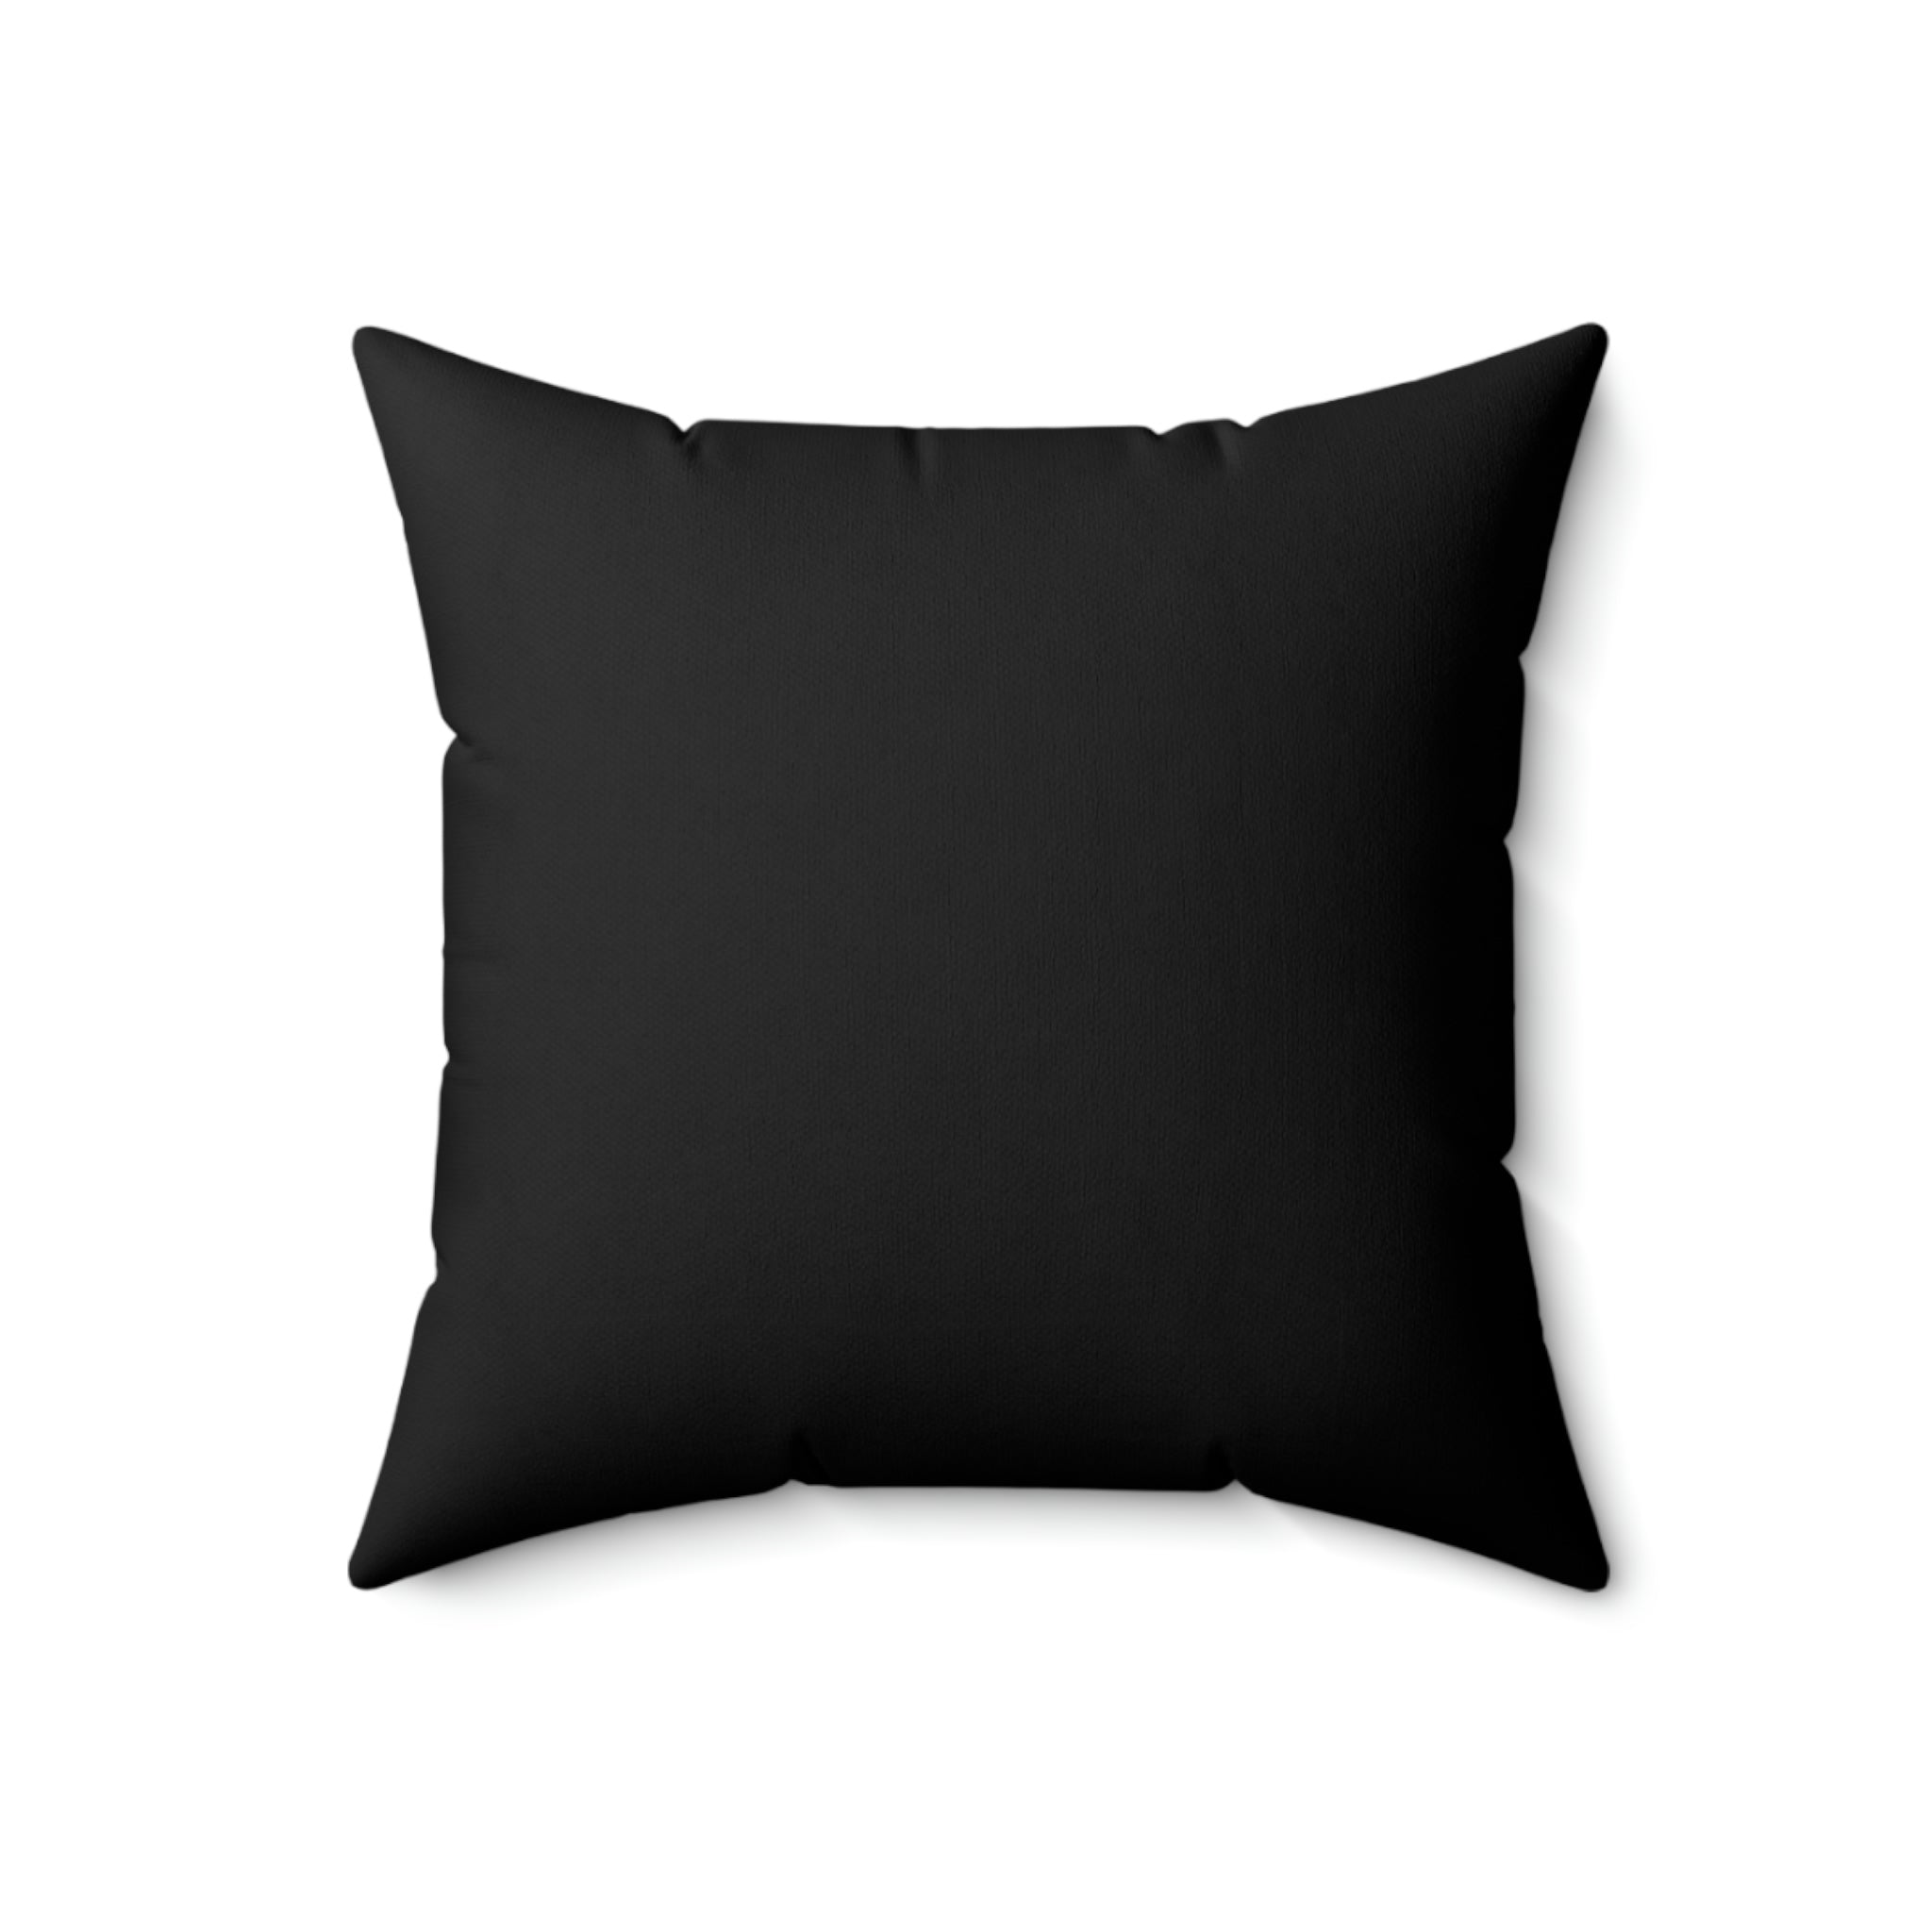 Young Girl Witch Throw Pillow, Black Square Multi-Size - Durazza